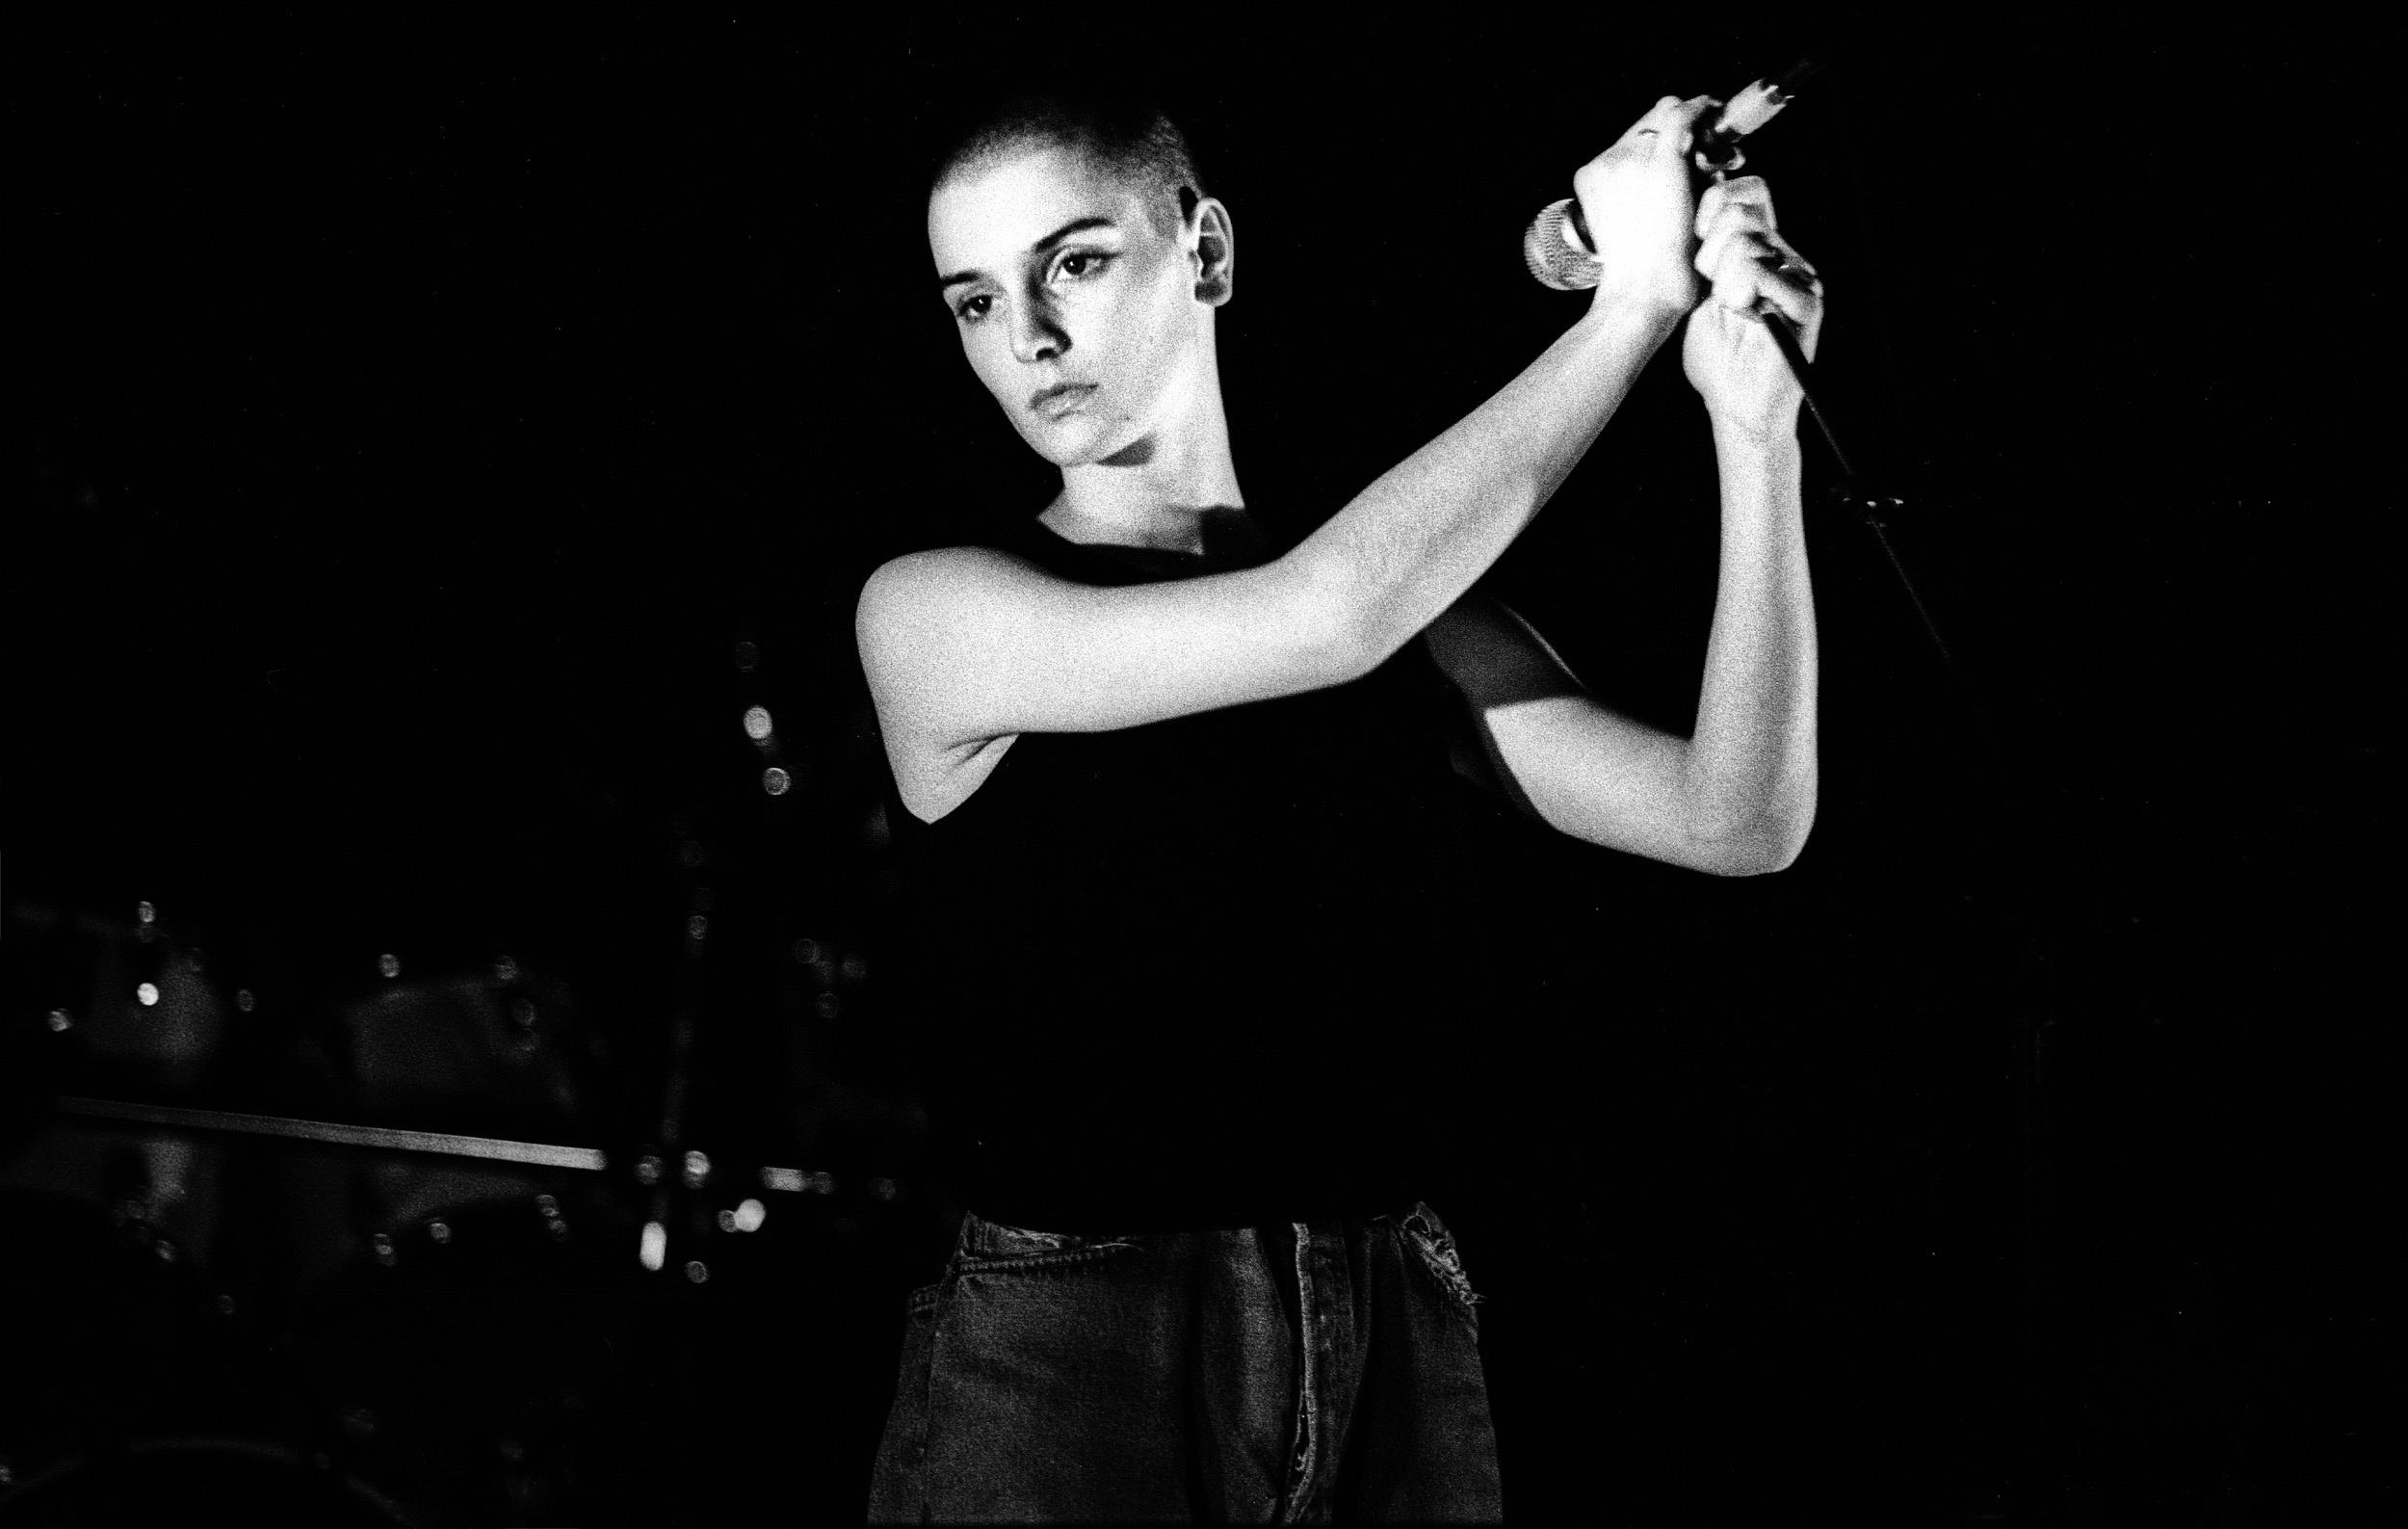 <p>Sinéad O'Connor's discography is an unwieldy beast, zigging exactly when you expect it to zag, following up superstar success with a full-blown jazz orchestra record and then veering into a record full of reggae covers and, on occasion, trying to reclaim the pop-rock sphere for her own. It's a wild journey, but following the bare-bones production of her 1987 debut, "Lion and the Cobra," O'Connor finds her voice on "I Do Not Want What I Haven't Got," giving folk-ballad vocals over hip-hop beats and crafting a sound that would go on to help define a lot of '90s pop music. Indie in aim but pop in approach, "I Do Not Want..." is a sturdy rock record that's unafraid to highlight O'Connor's utterly distinct voice. Of course, "Nothing Compares 2 U" is the smash, but the rollicking "The Emperor's New Clothes" and absolutely biting "You Cause as Much Sorrow" proved that O'Connor had powerful songwriting chops that, sadly, got overshadowed by her public antics. Her discography may be confusing as all get-out, but at the very least, she will always be remembered for giving us one shining, powerful rock record.</p><p><a href='https://www.msn.com/en-us/community/channel/vid-cj9pqbr0vn9in2b6ddcd8sfgpfq6x6utp44fssrv6mc2gtybw0us'>Follow us on MSN to see more of our exclusive entertainment content.</a></p>